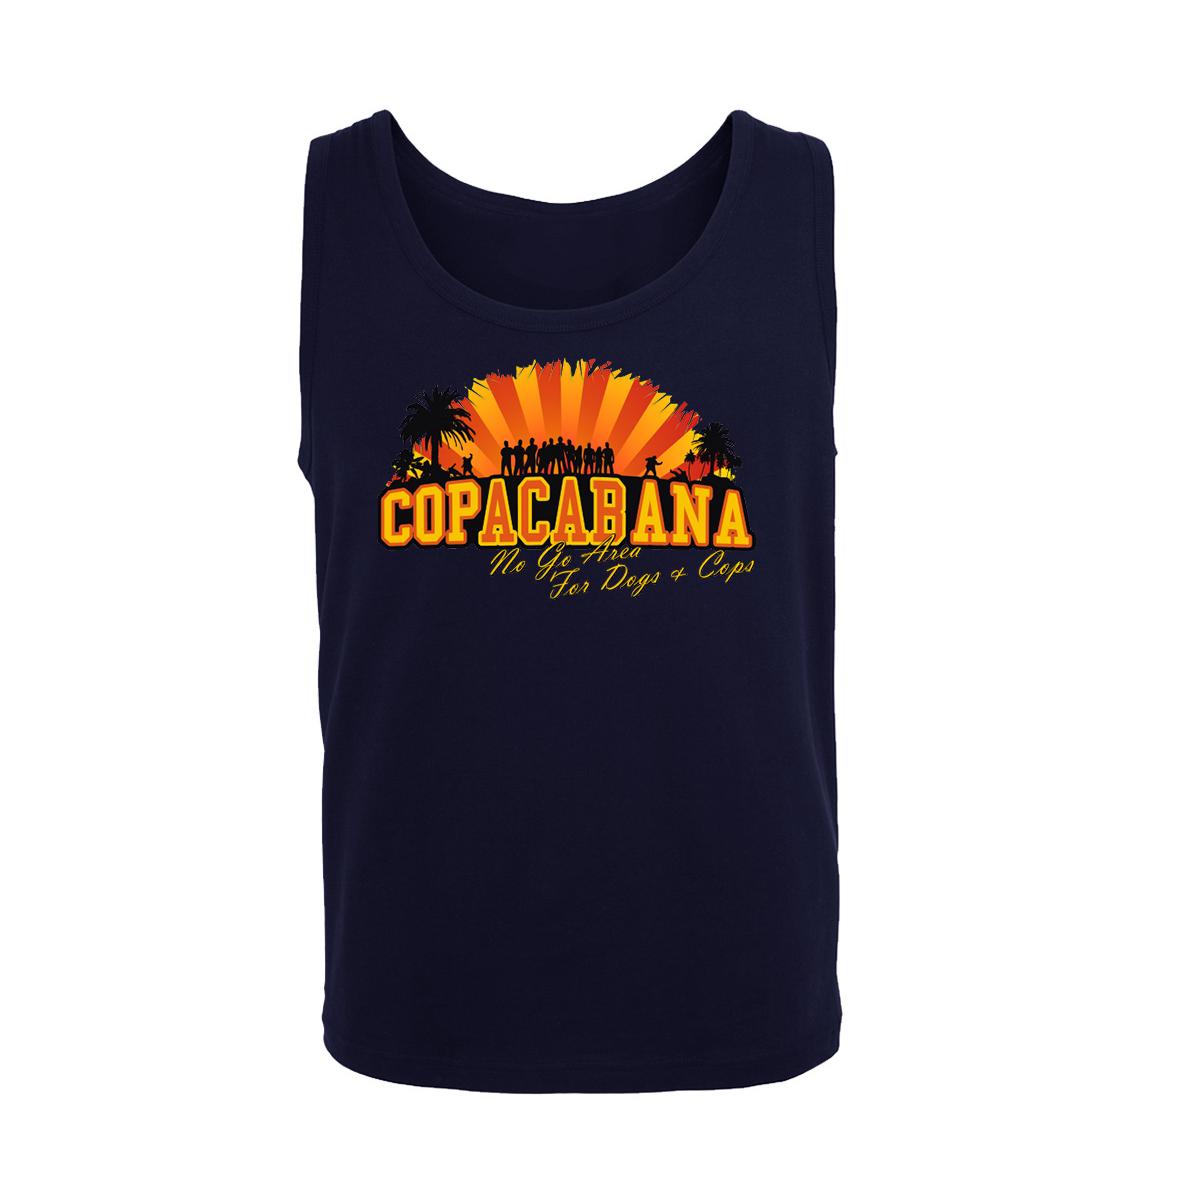 Copacabana - No go Area for Dogs and Cops - Männer Muskelshirt - navy